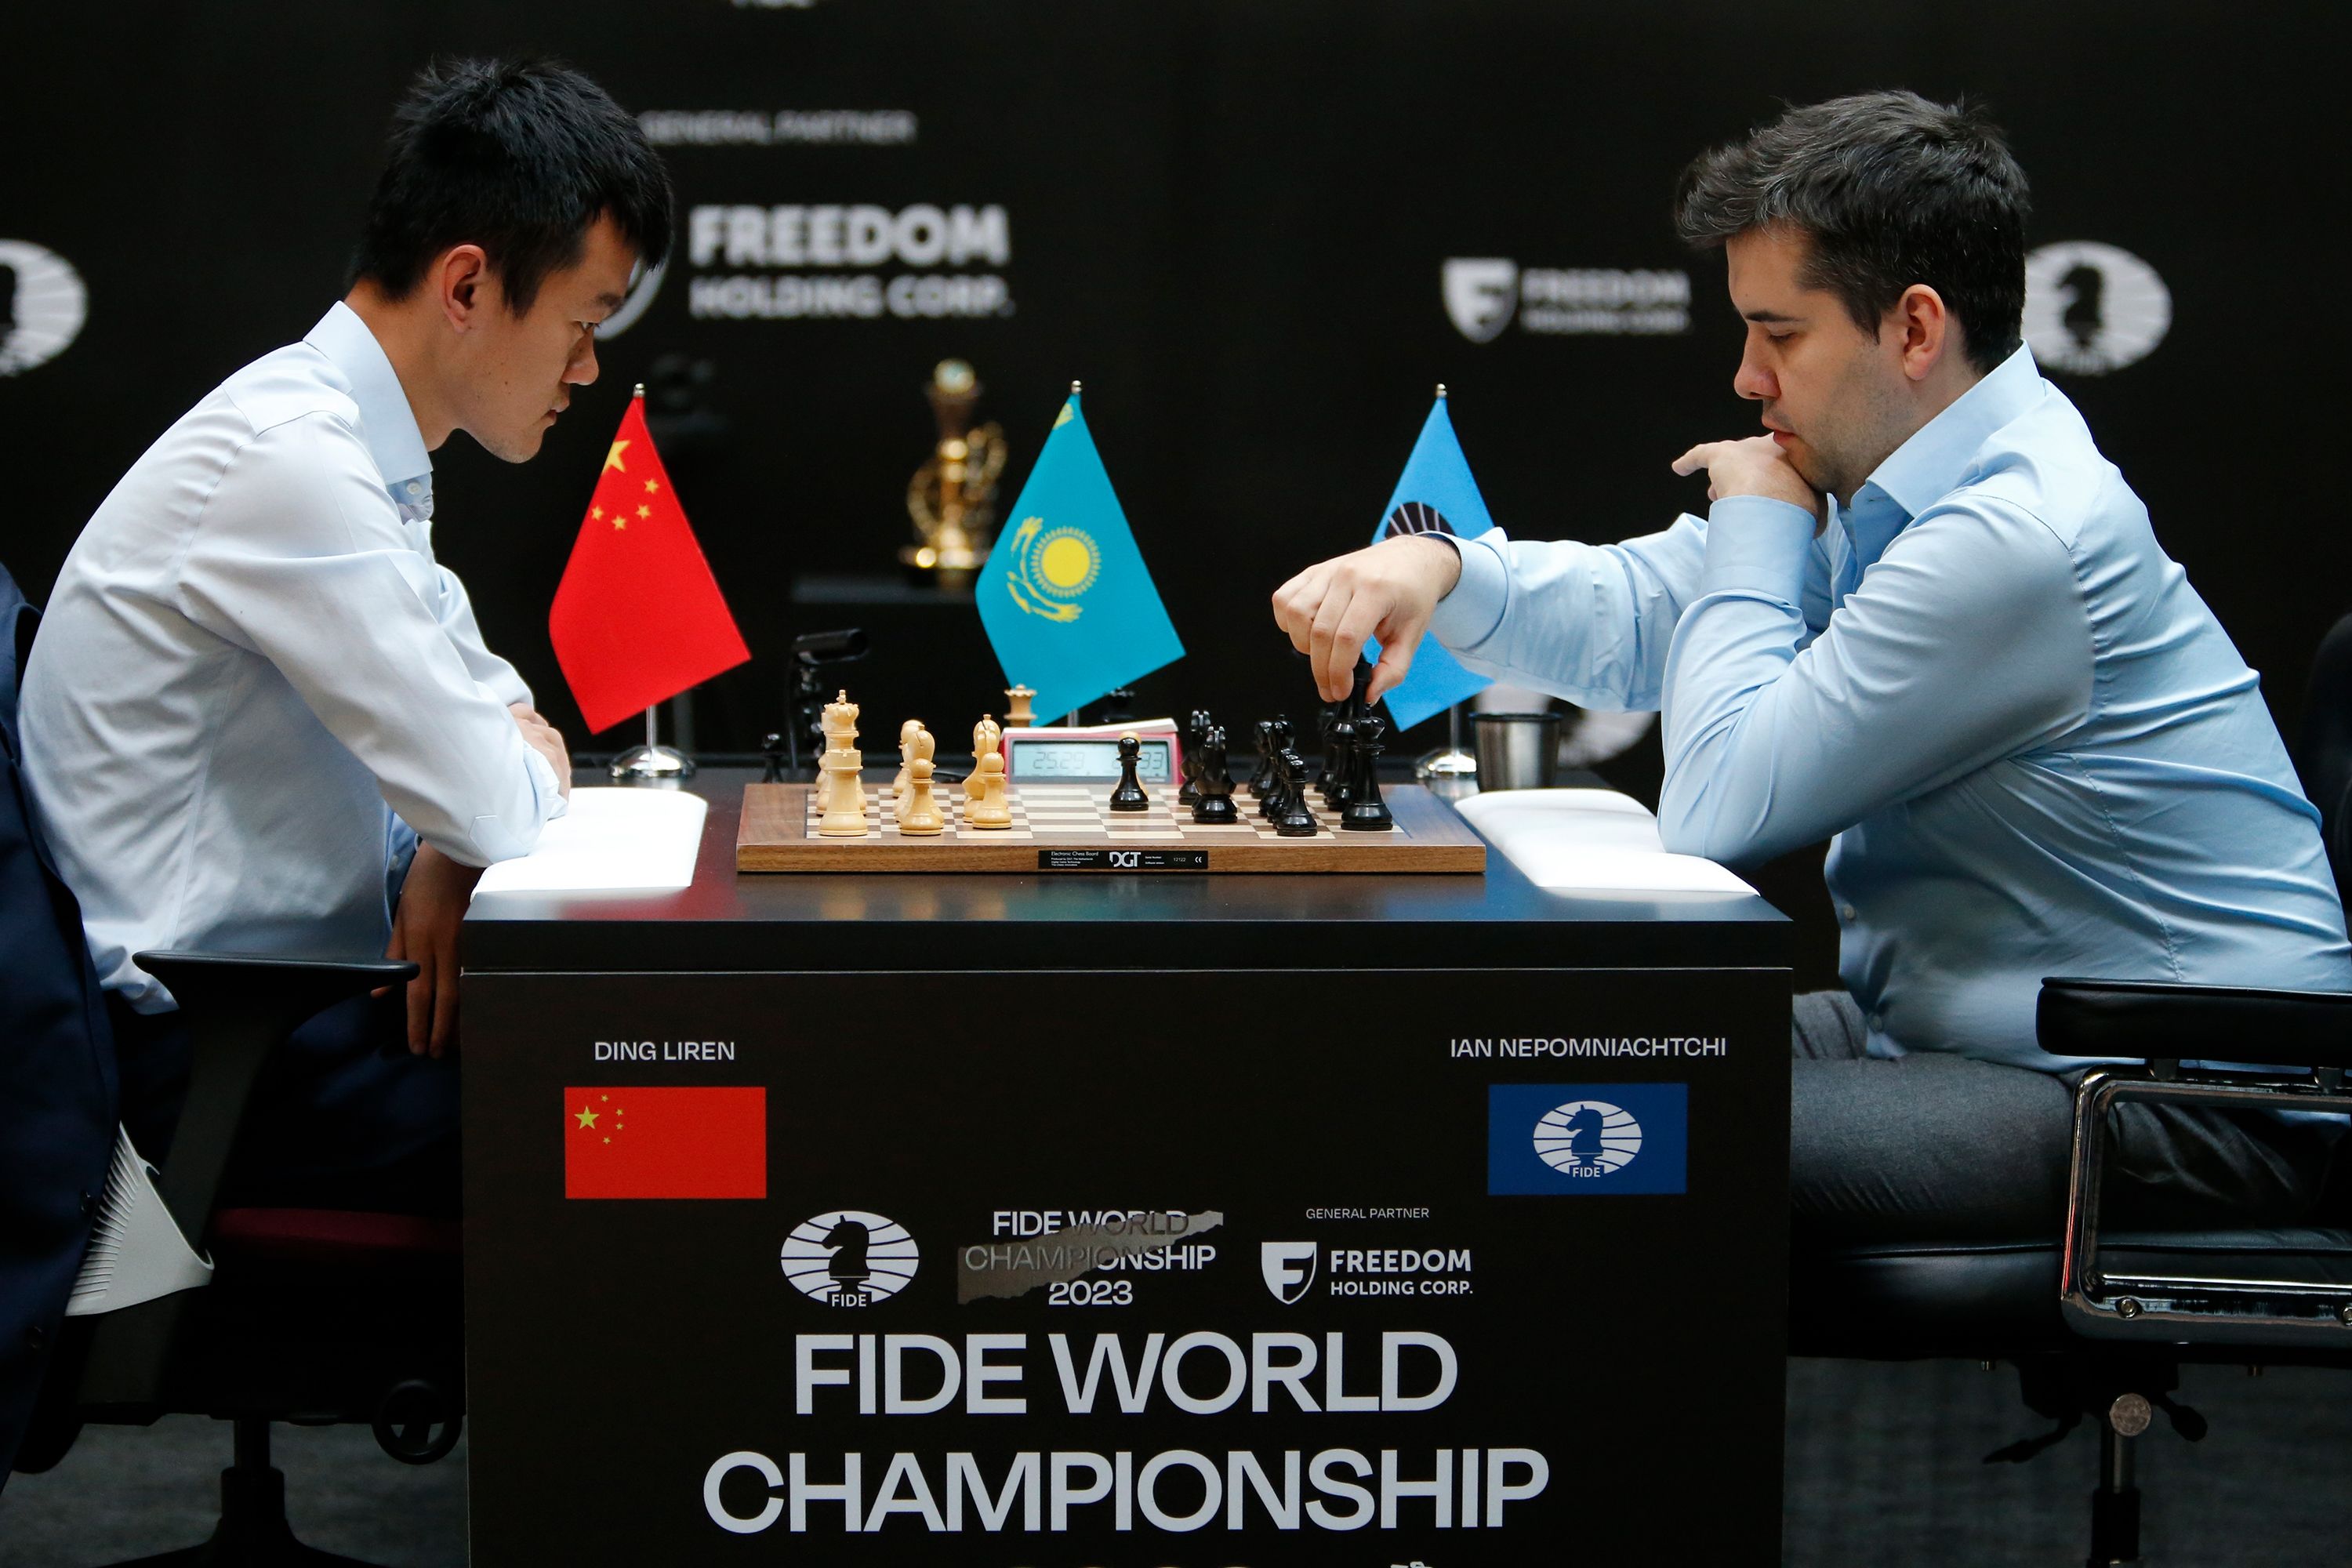 China's Ding Liren plays against Russia's Ian Nepomniachtchi